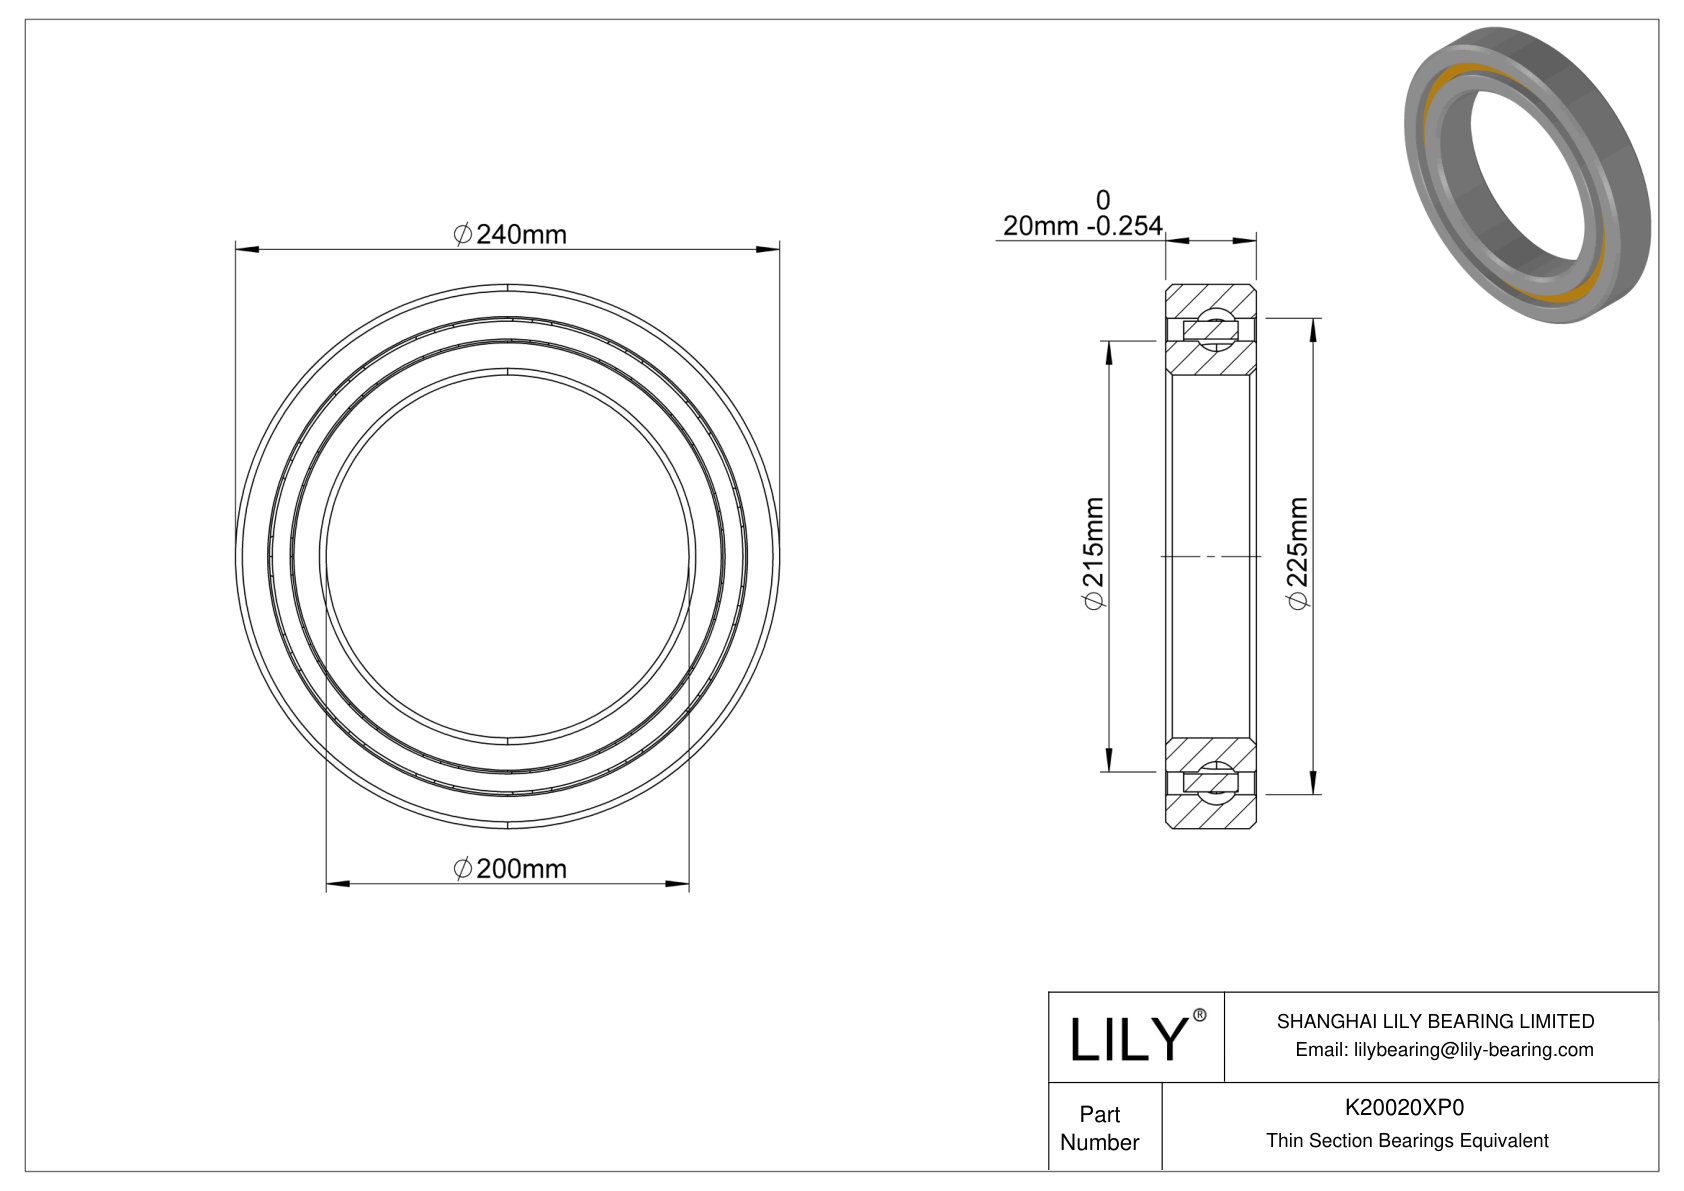 K20020XP0 Constant Section (CS) Bearings cad drawing